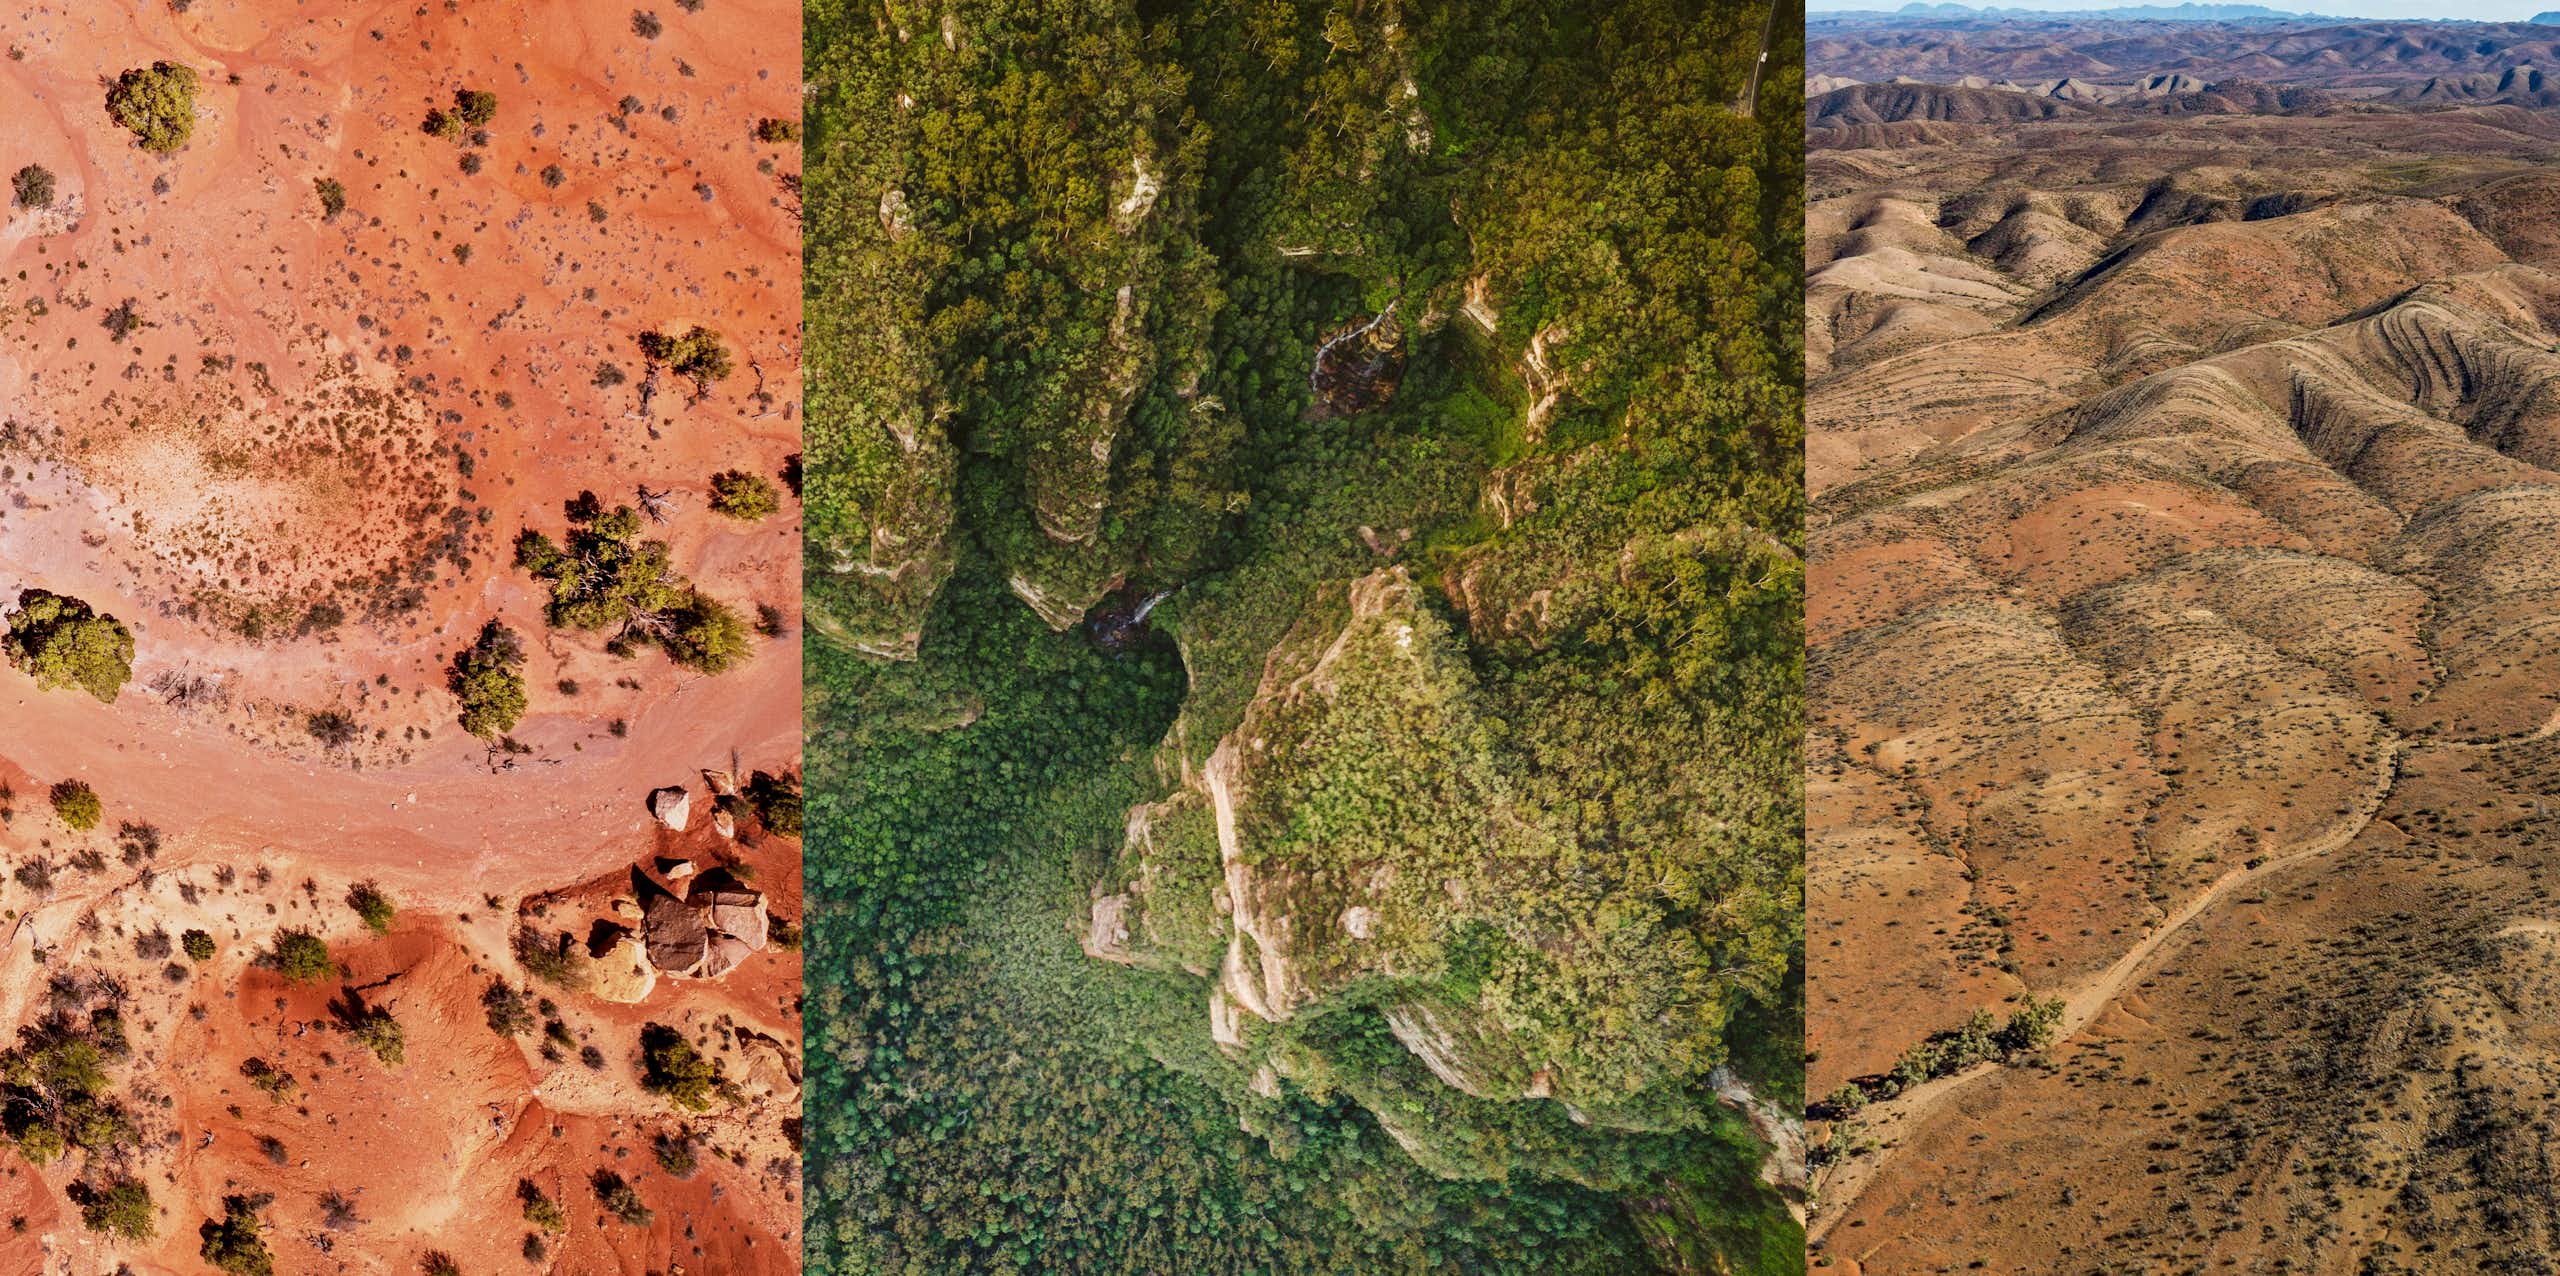 We reconstructed landscapes that greeted the first humans in Australia around 65,000 years ago